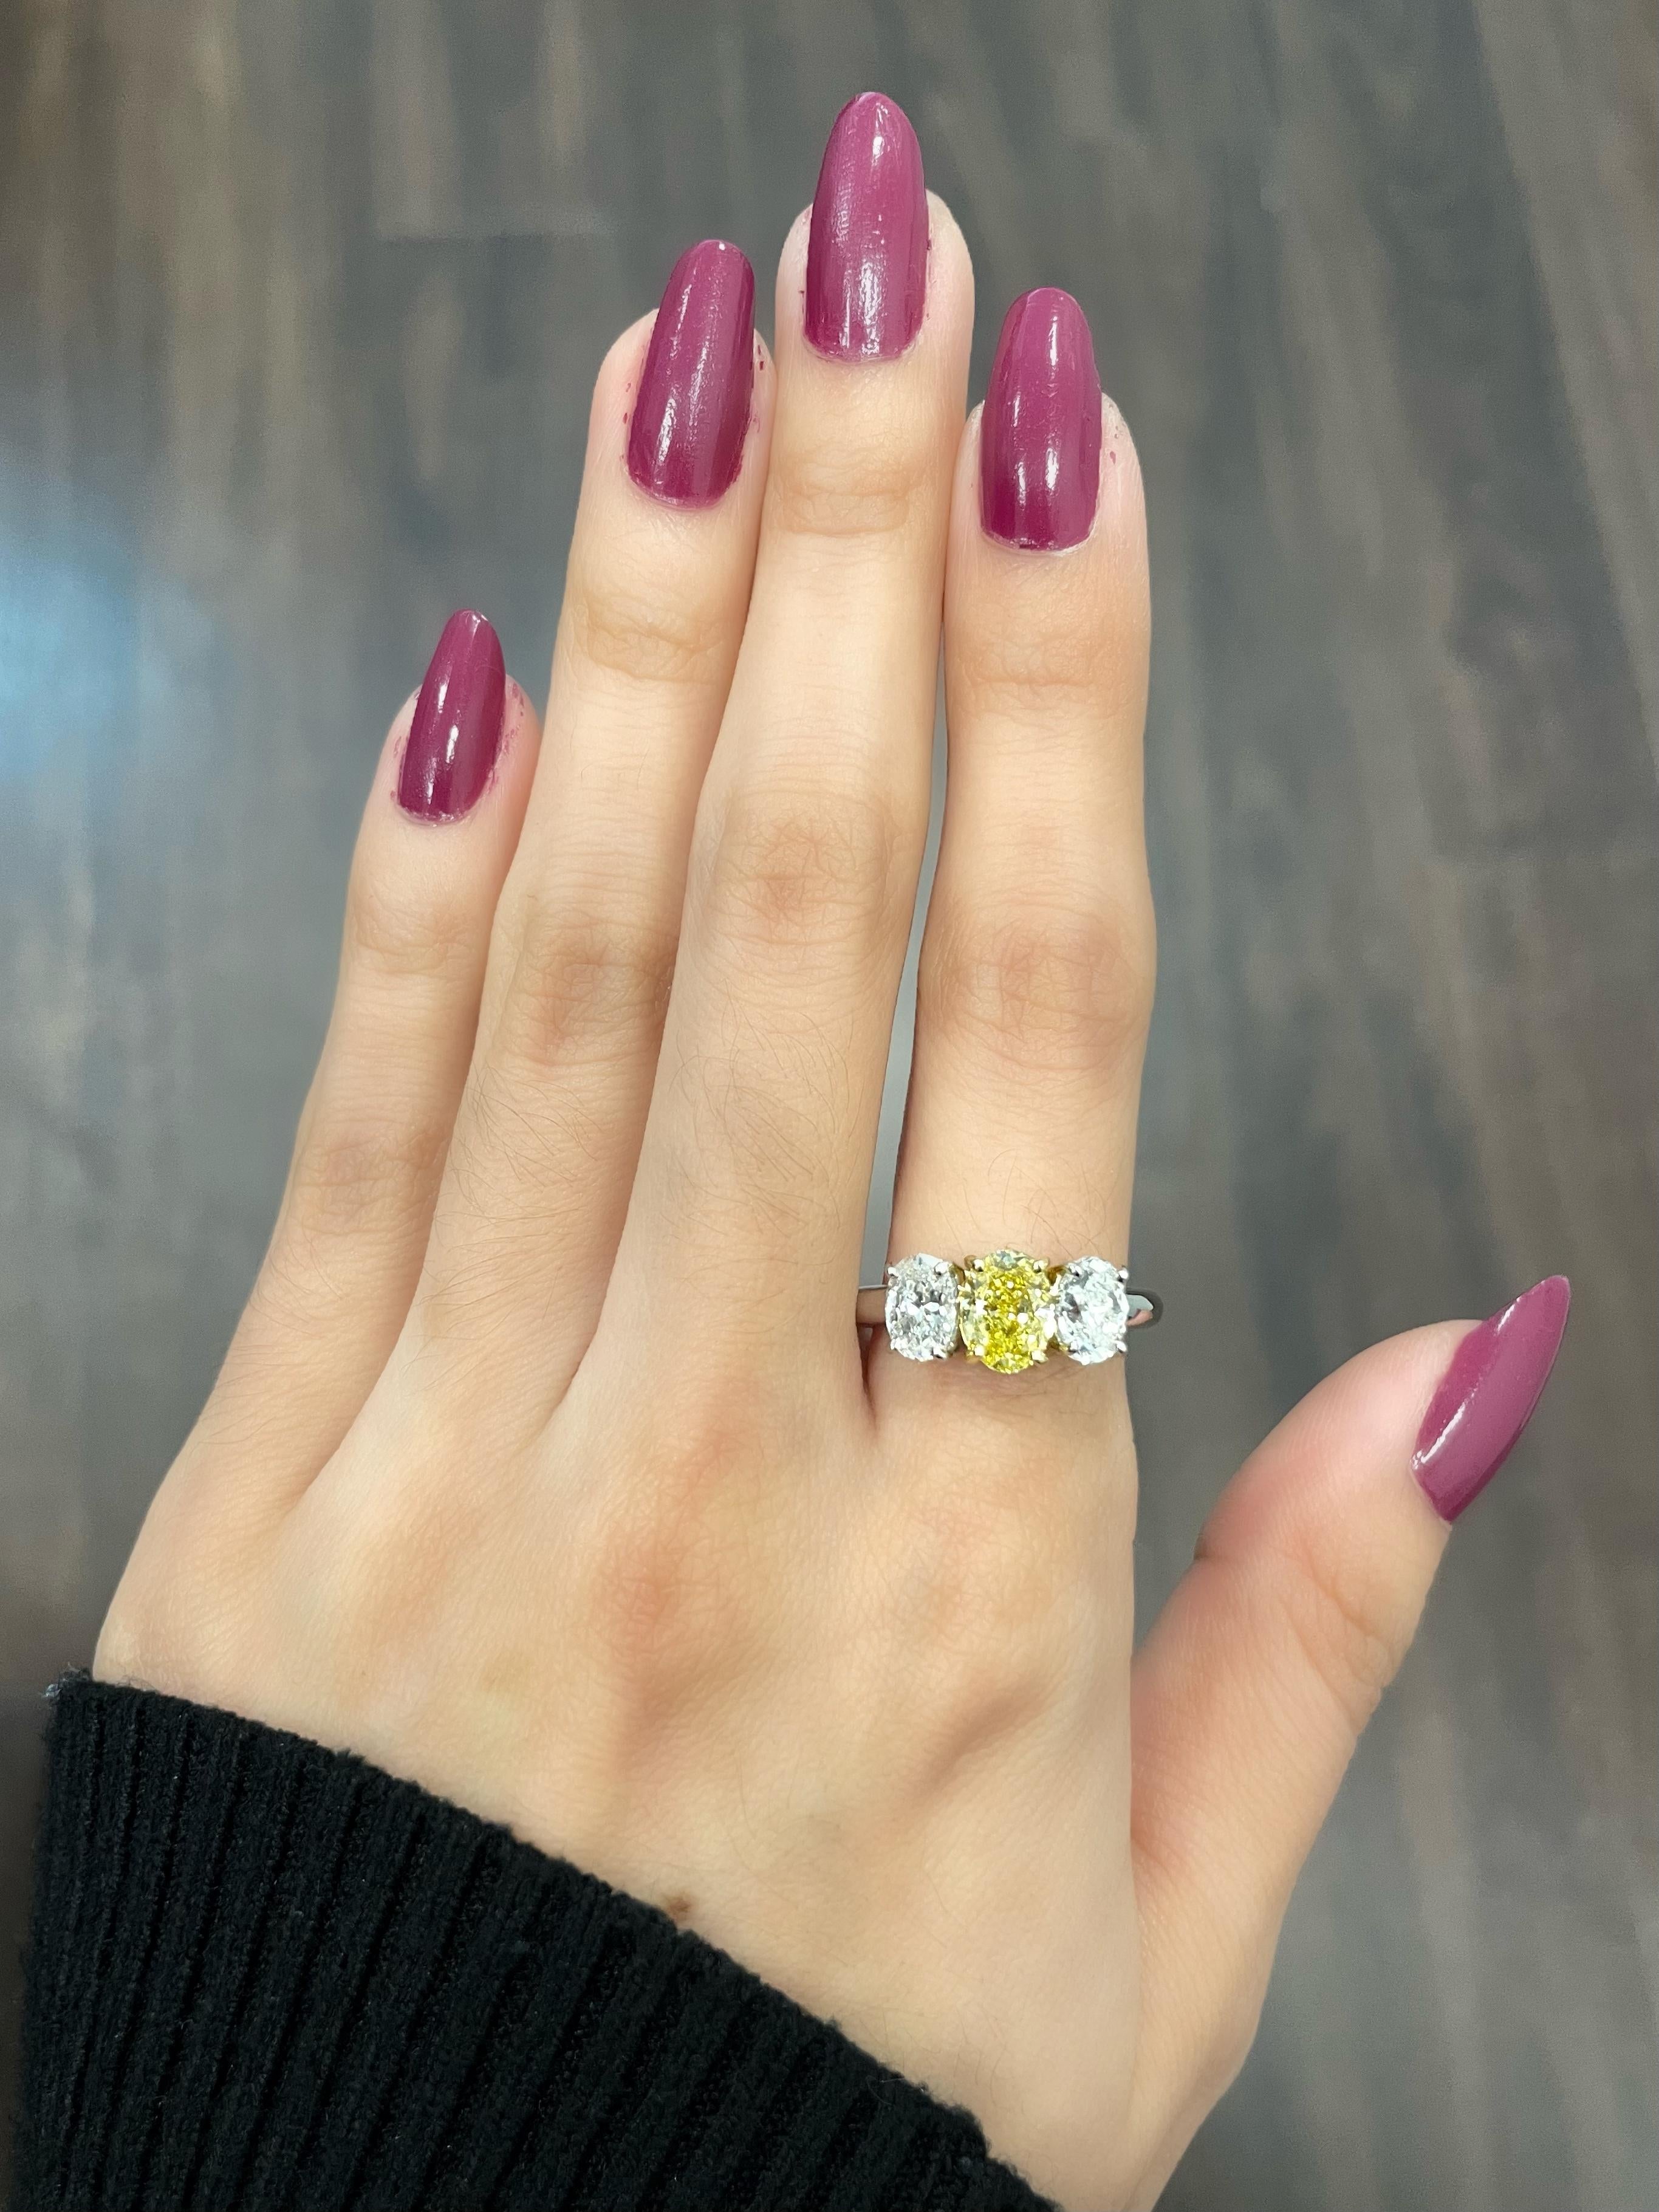 This stunning 2.21-carat three-stone yellow and white diamond ring is the perfect addition to any jewelry collection. The center stone is a beautiful natural yellow diamond weighing .96 Fancy intense yellow accompanied by GIA.  The ring is